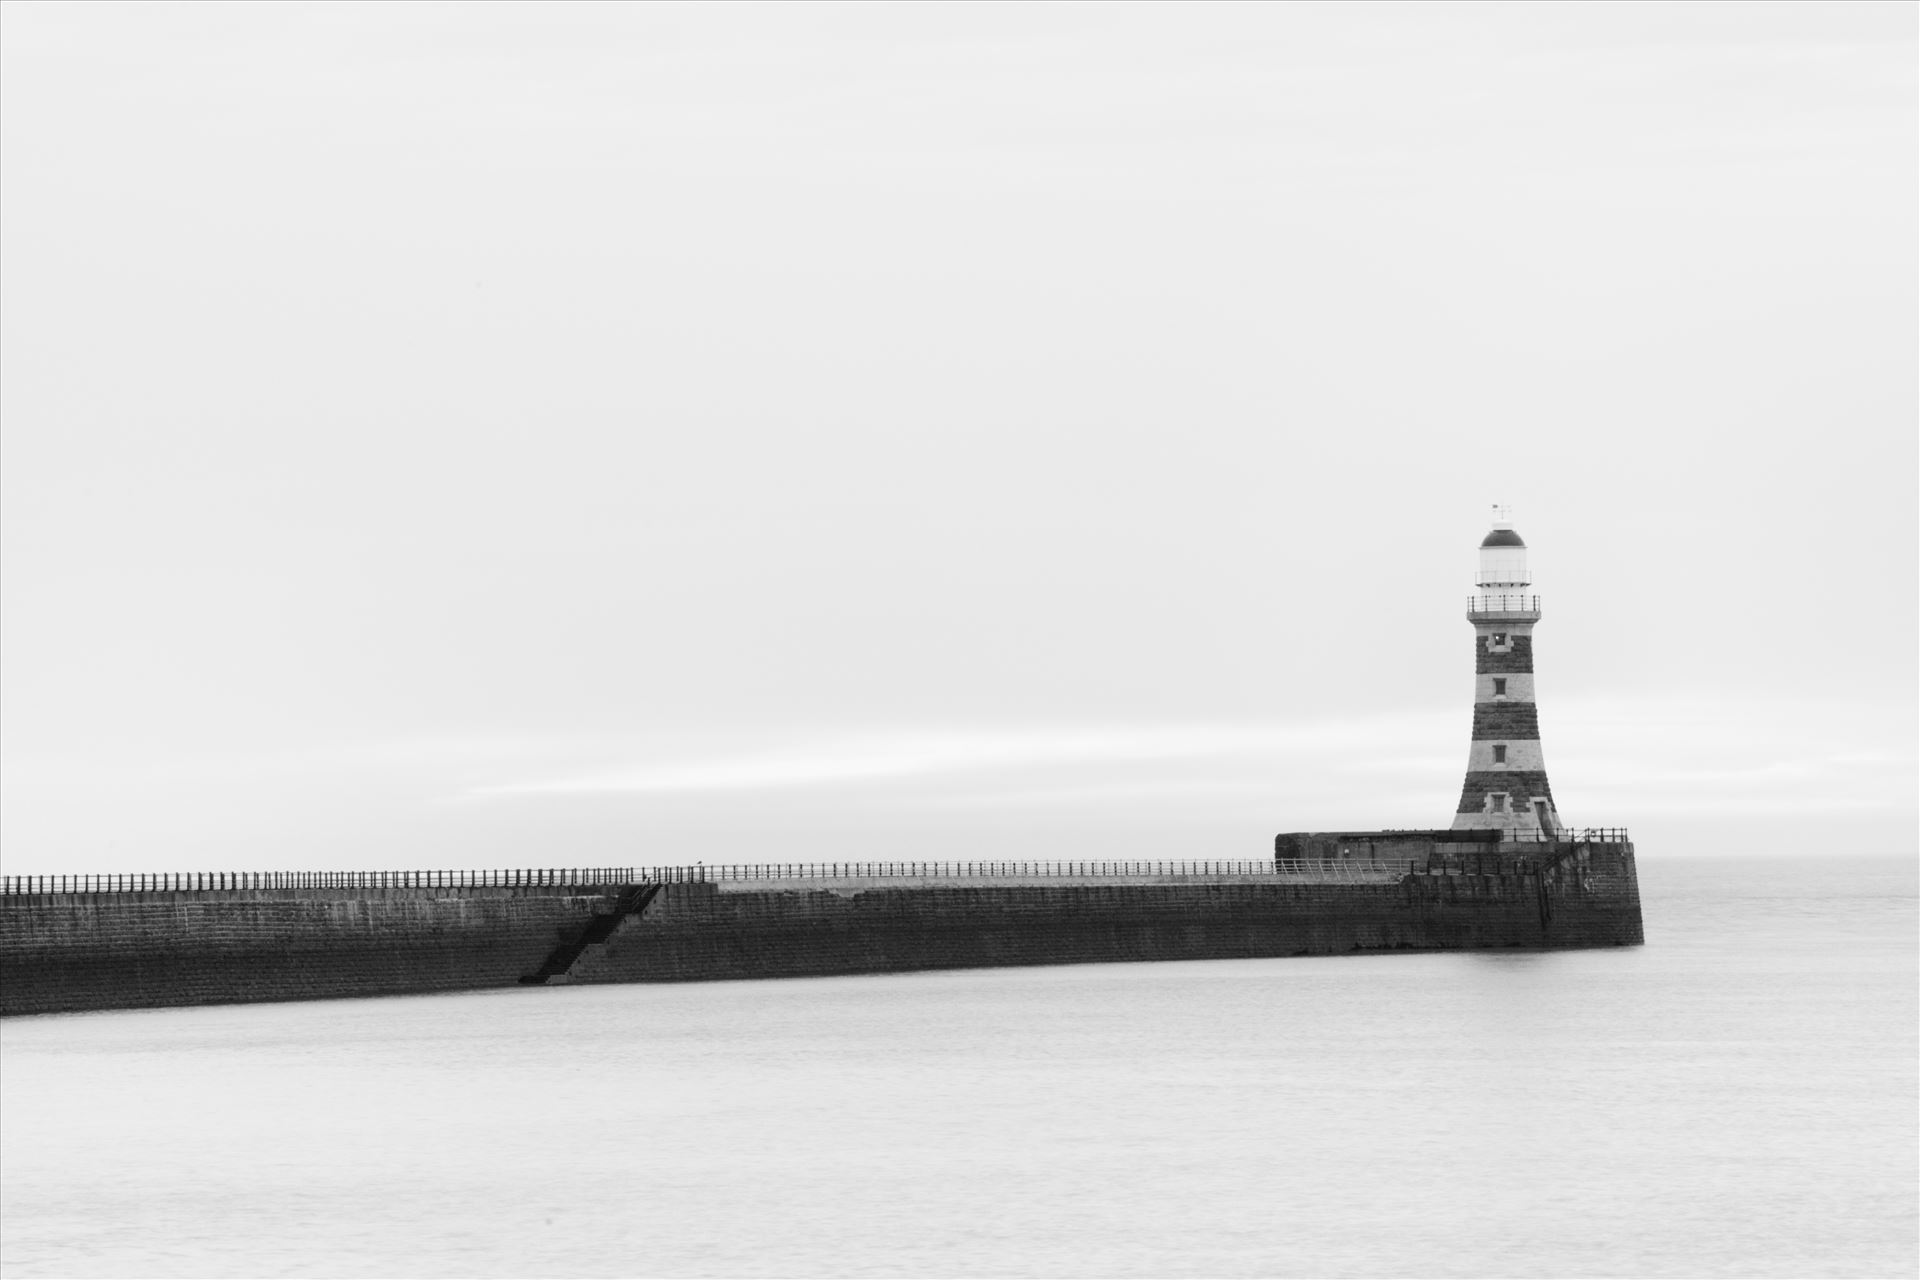 Roker Pier, Sunderland - For over a hundred years, Roker Pier & Lighthouse has protected the entrance into Sunderland's harbour with the pier, and distinctive red and grey granite hoops of the lighthouse, as one of the City's most iconic landmarks. by philreay